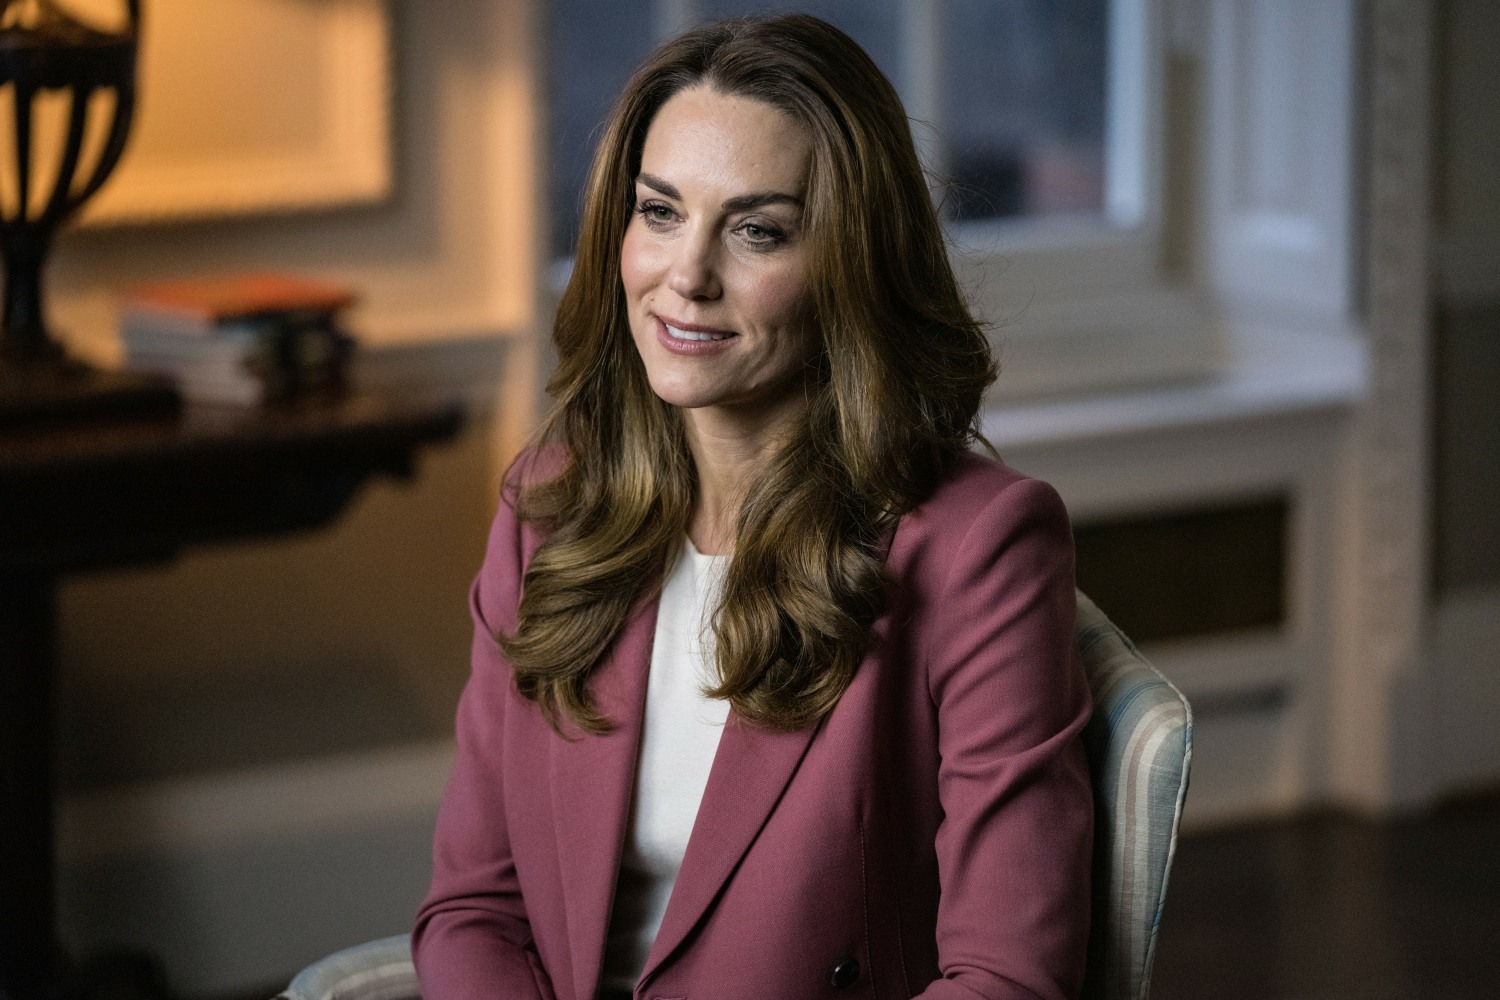 THE DUCHESS OF CAMBRIDGE GIVES KEYNOTE SPEECH AT THE ROYAL FOUNDATION’S FORUM ON THE EARLY YEARS